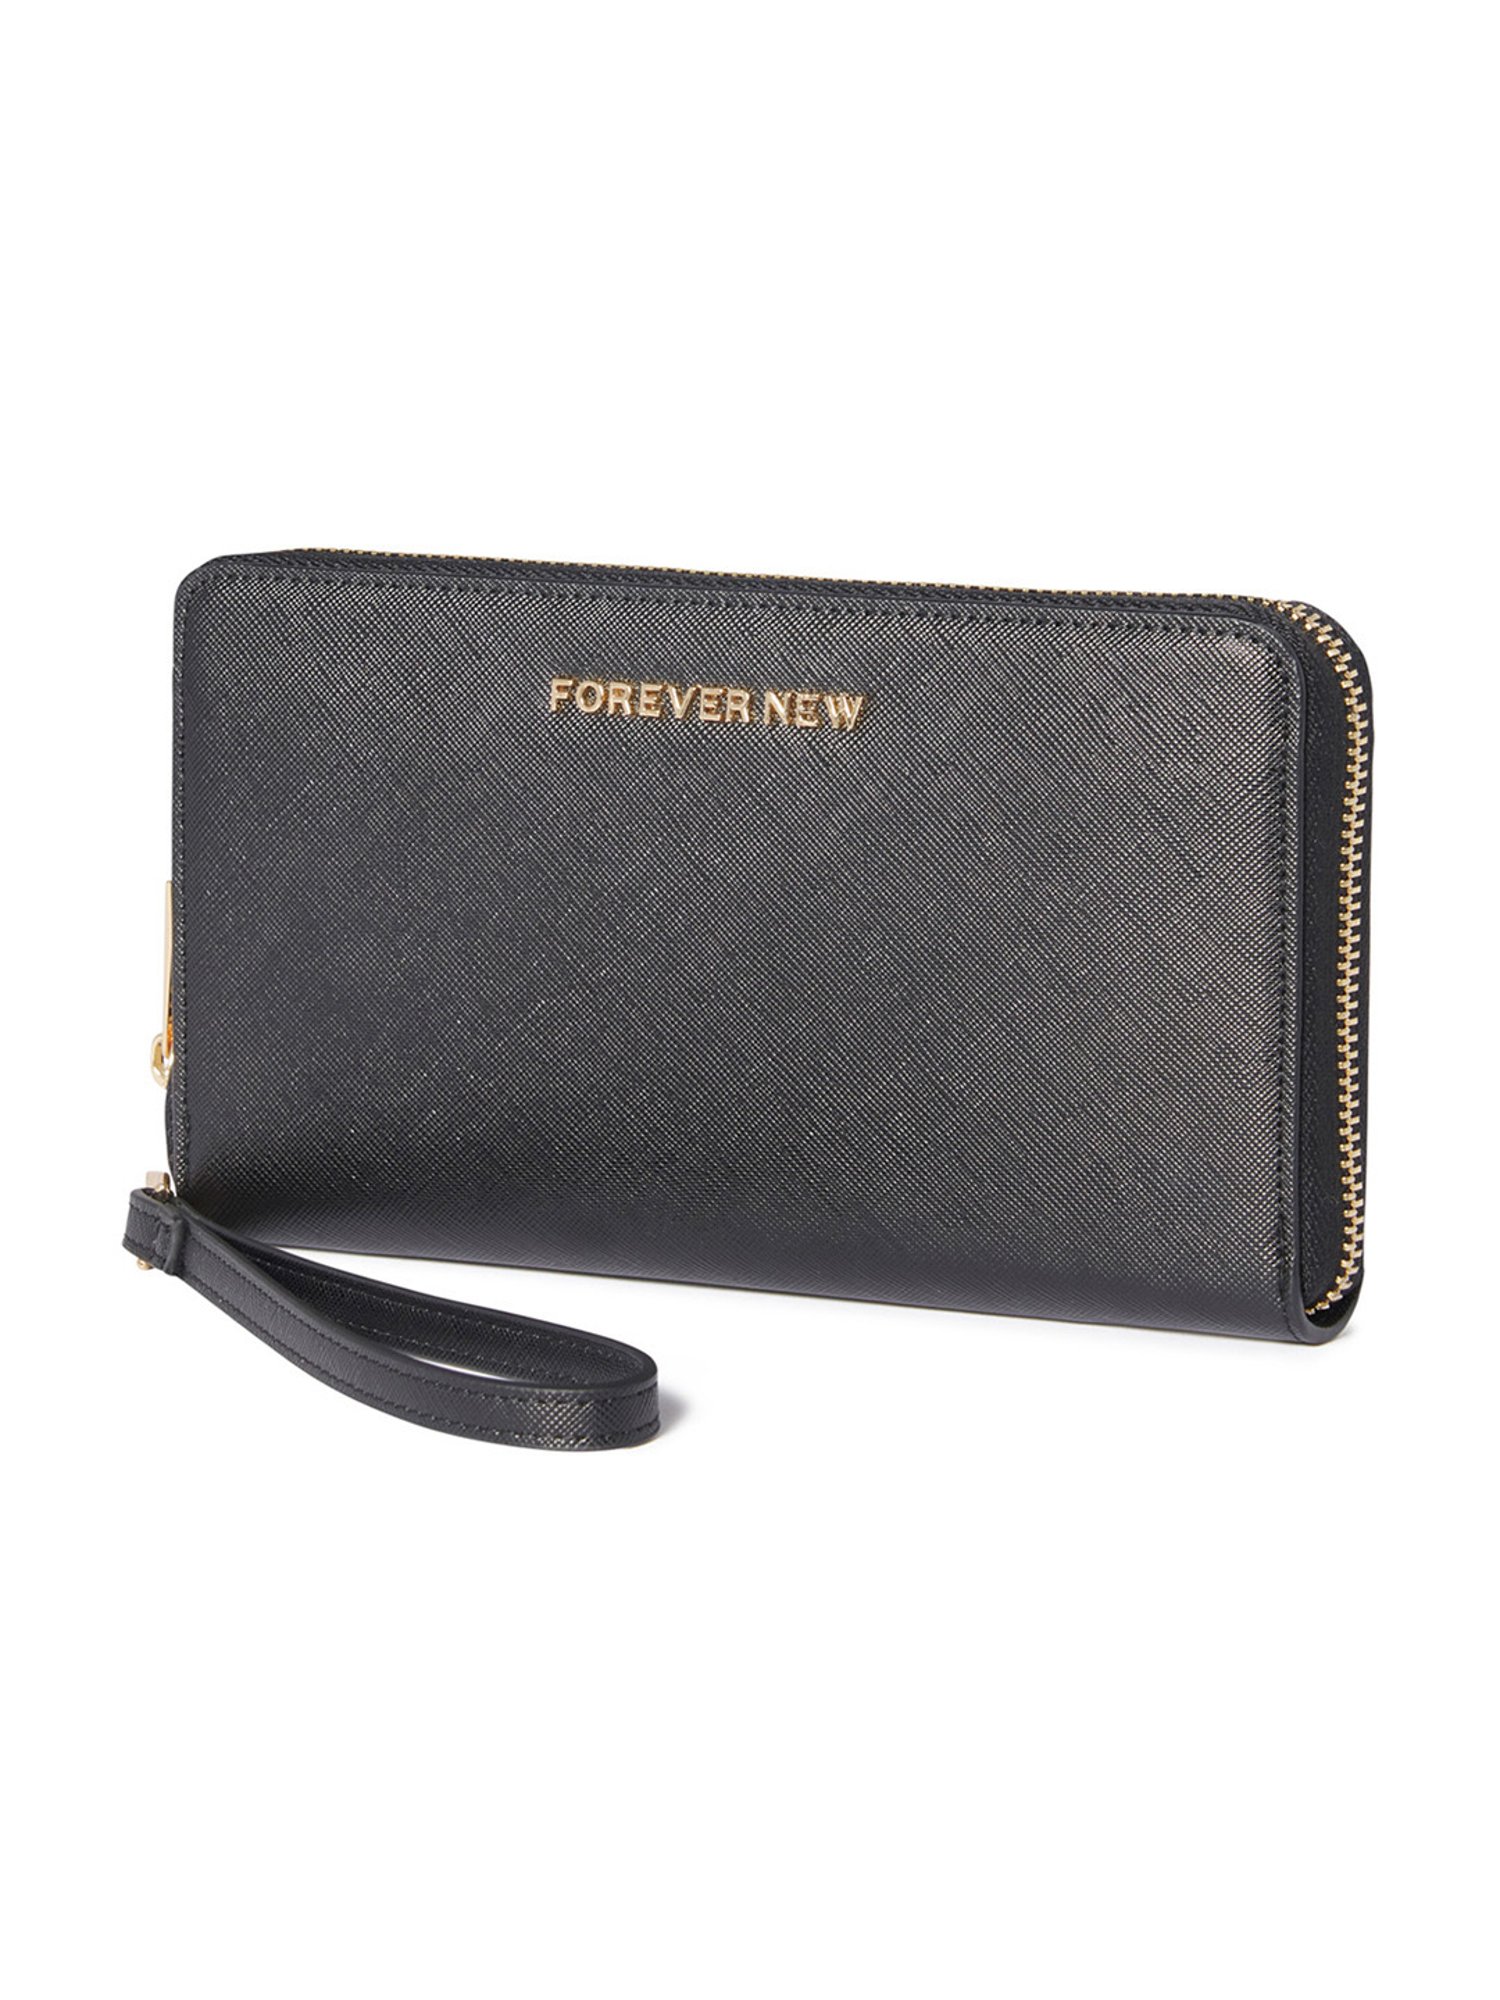 Forever 21 Purse - La Paz County Sheriff's Office 